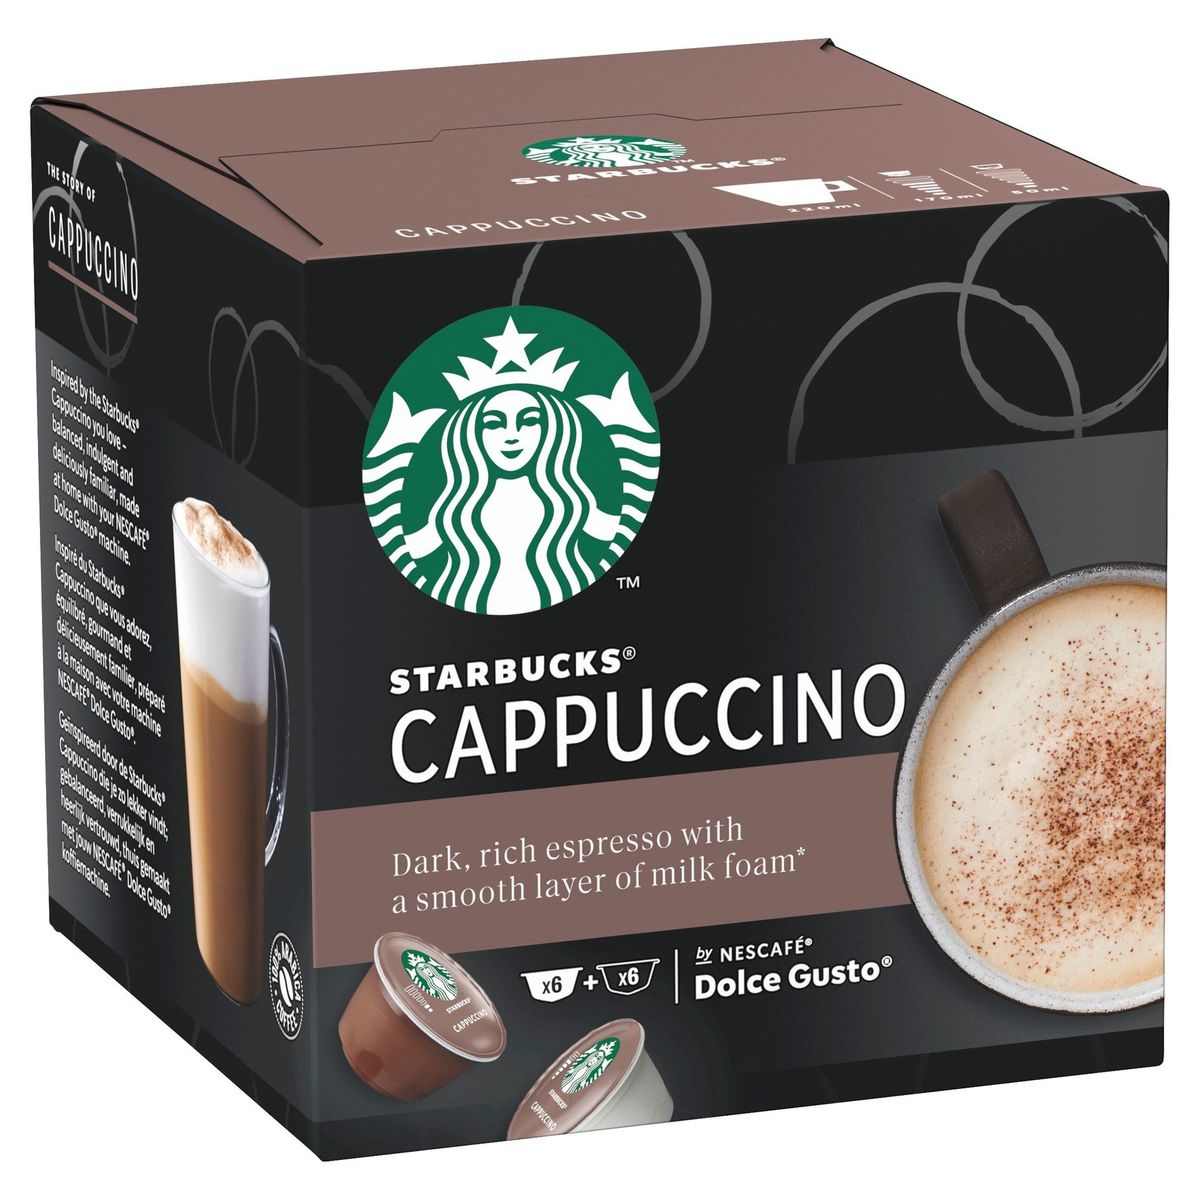 Starbucks Cappuccino by NESCAFE DOLCE GUSTO 6+6 Capsules,120 g